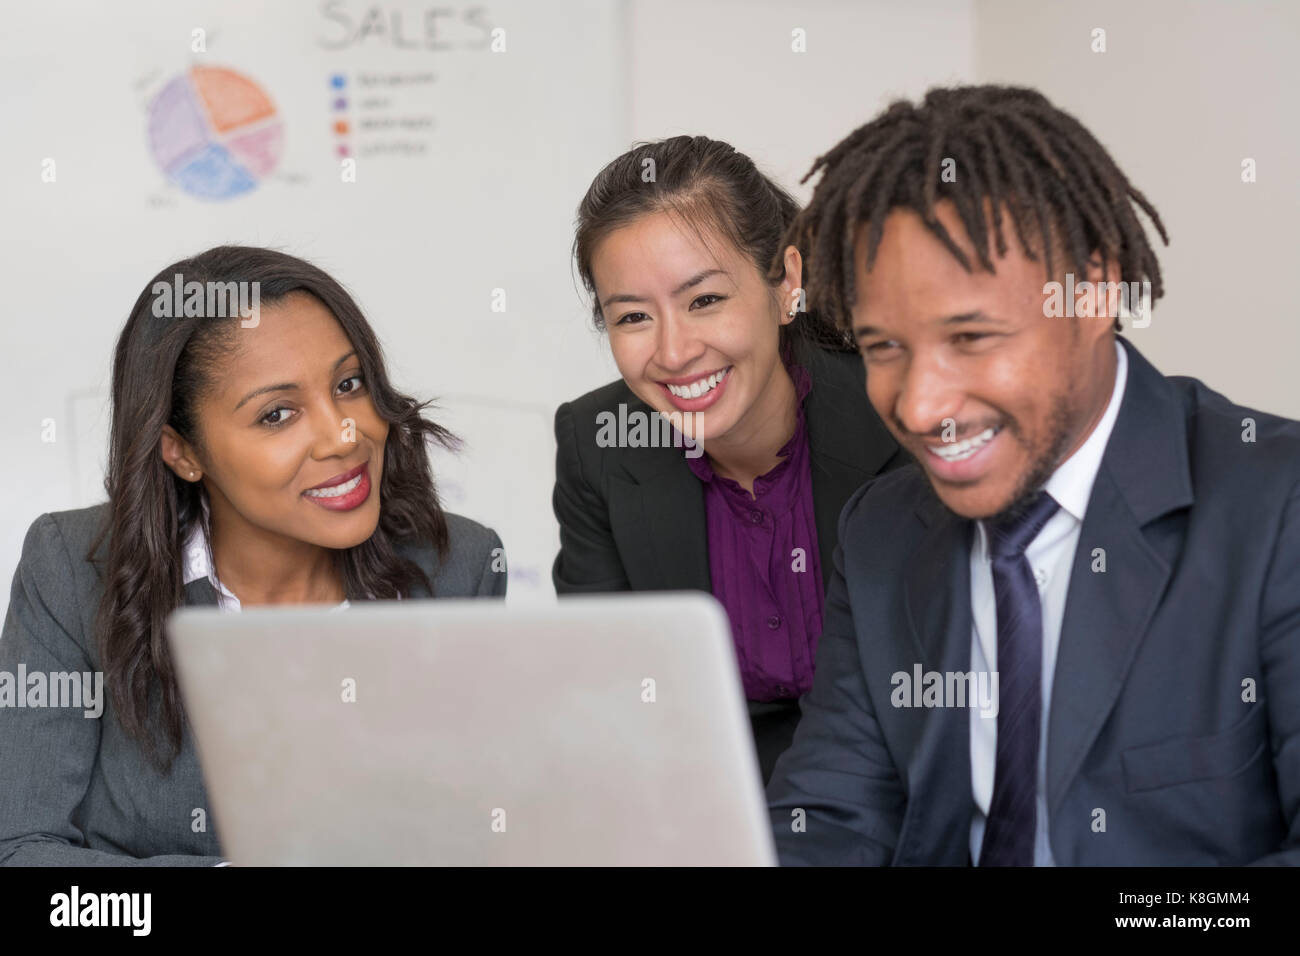 Businessman and businesswomen, in office, looking at laptop Stock Photo